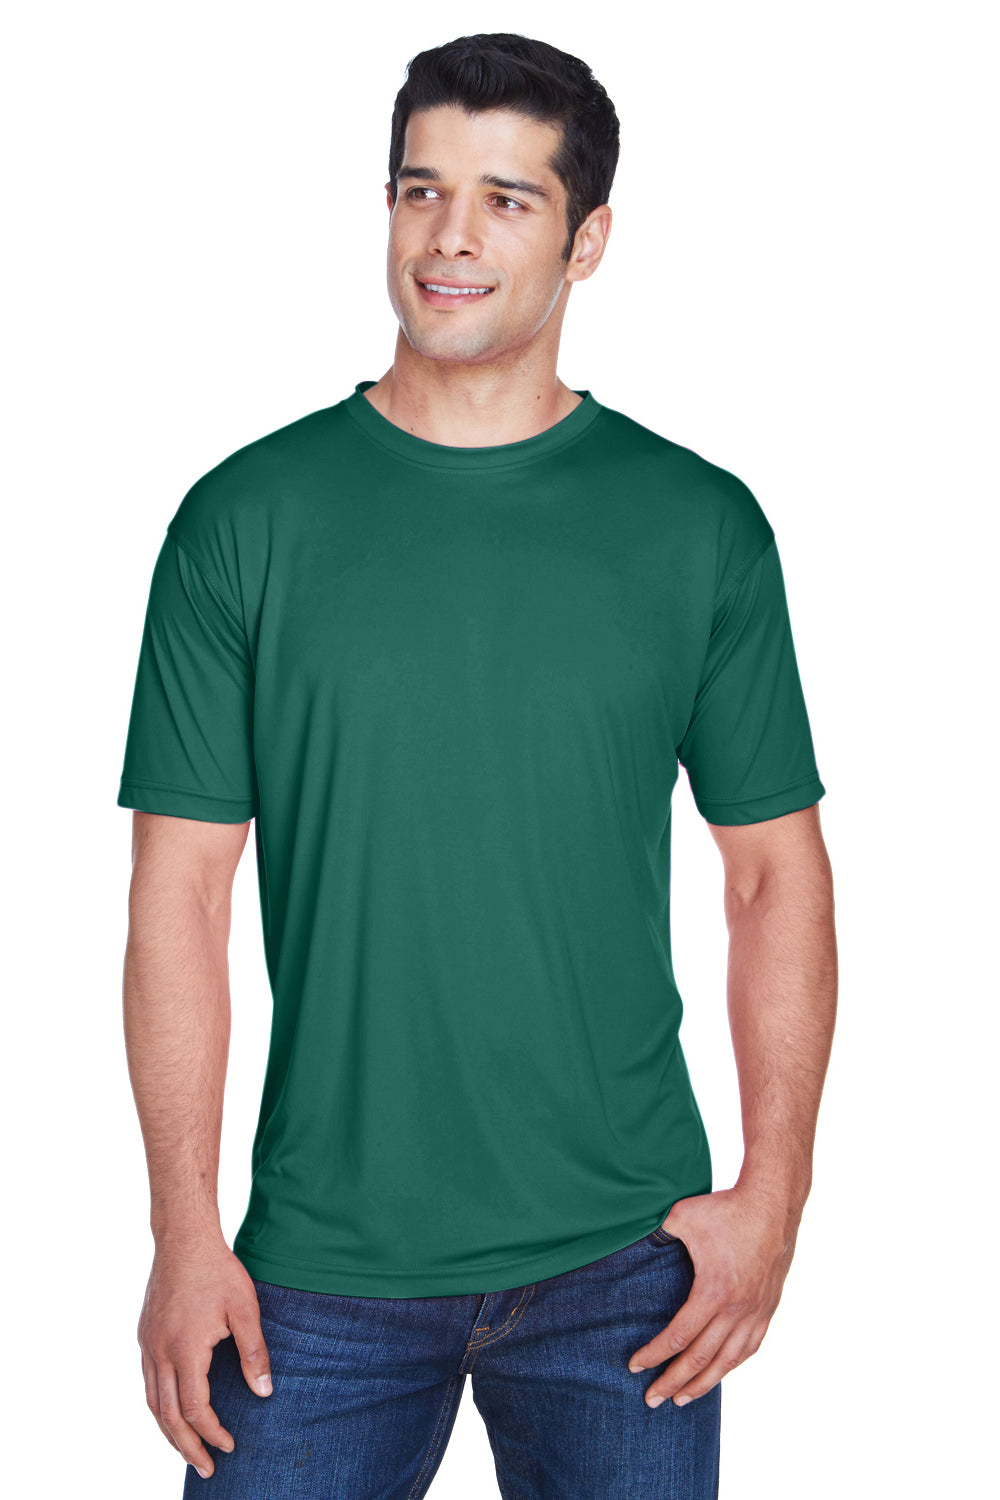 UltraClub 8420 Mens Cool & Dry Performance Moisture Wicking Short Sleeve Crewneck T-Shirt Forest Green Front